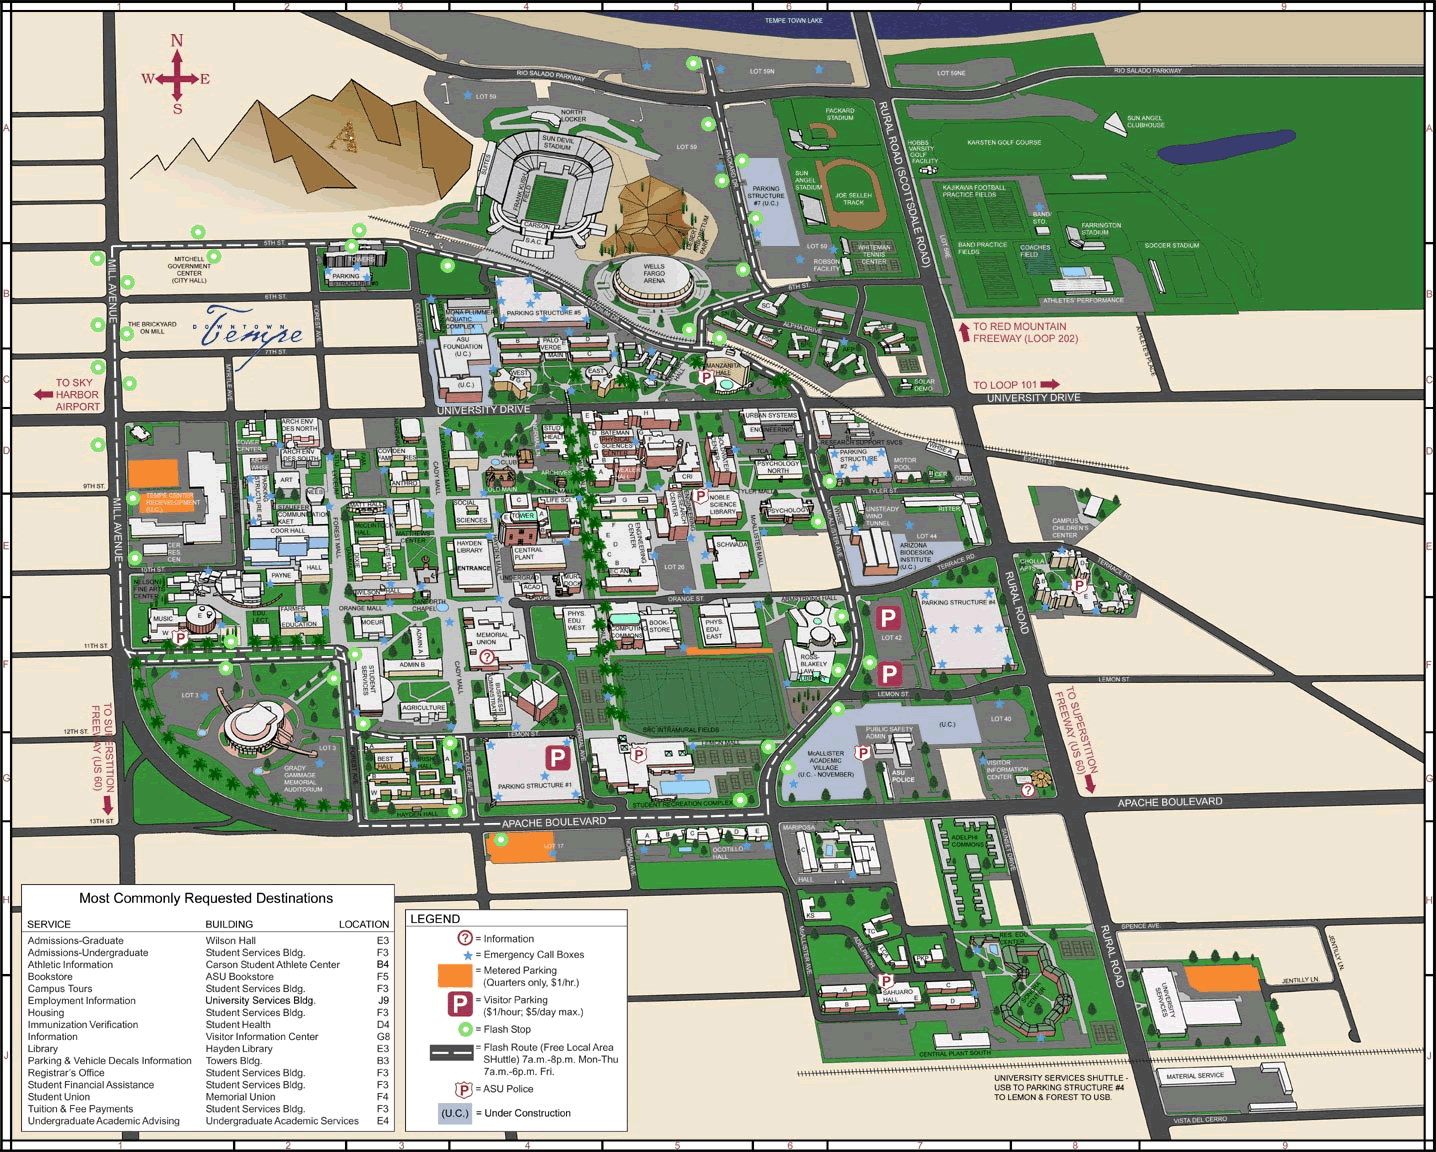 Uoa campus map - mazcard